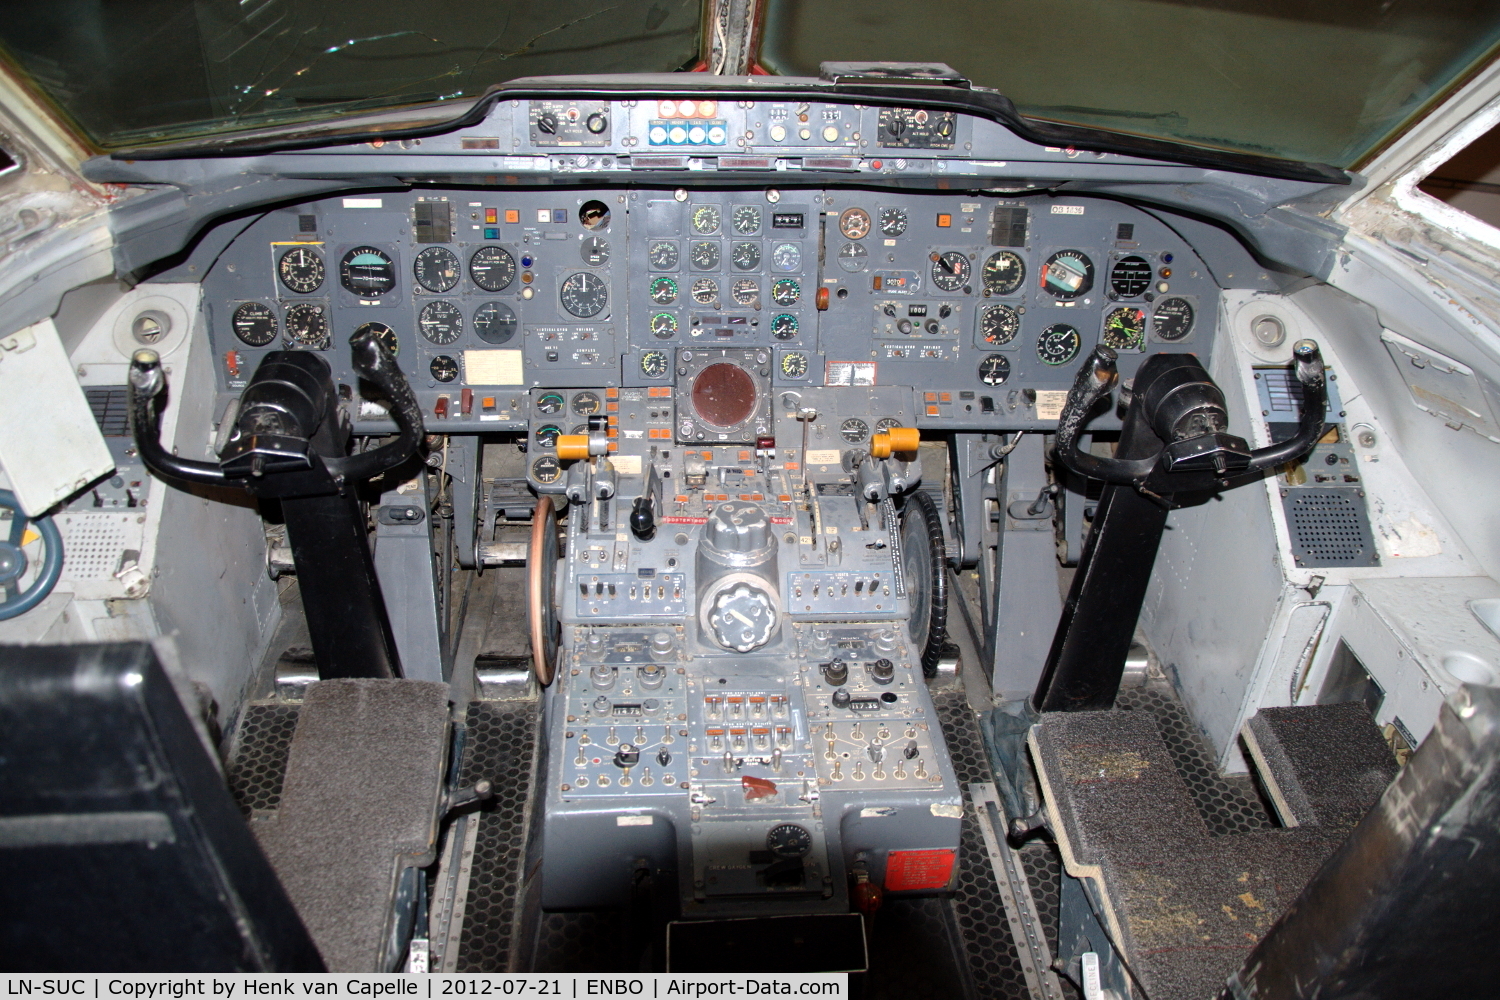 LN-SUC, 1969 Fokker F.28-1000 Fellowship C/N 11009, The cockpit of the Fokker F.28, which is preserved in its original delivery colourscheme of Braathens SAFE in the Norsk Luftfartsmuseum at Bodø Airport, Norway.